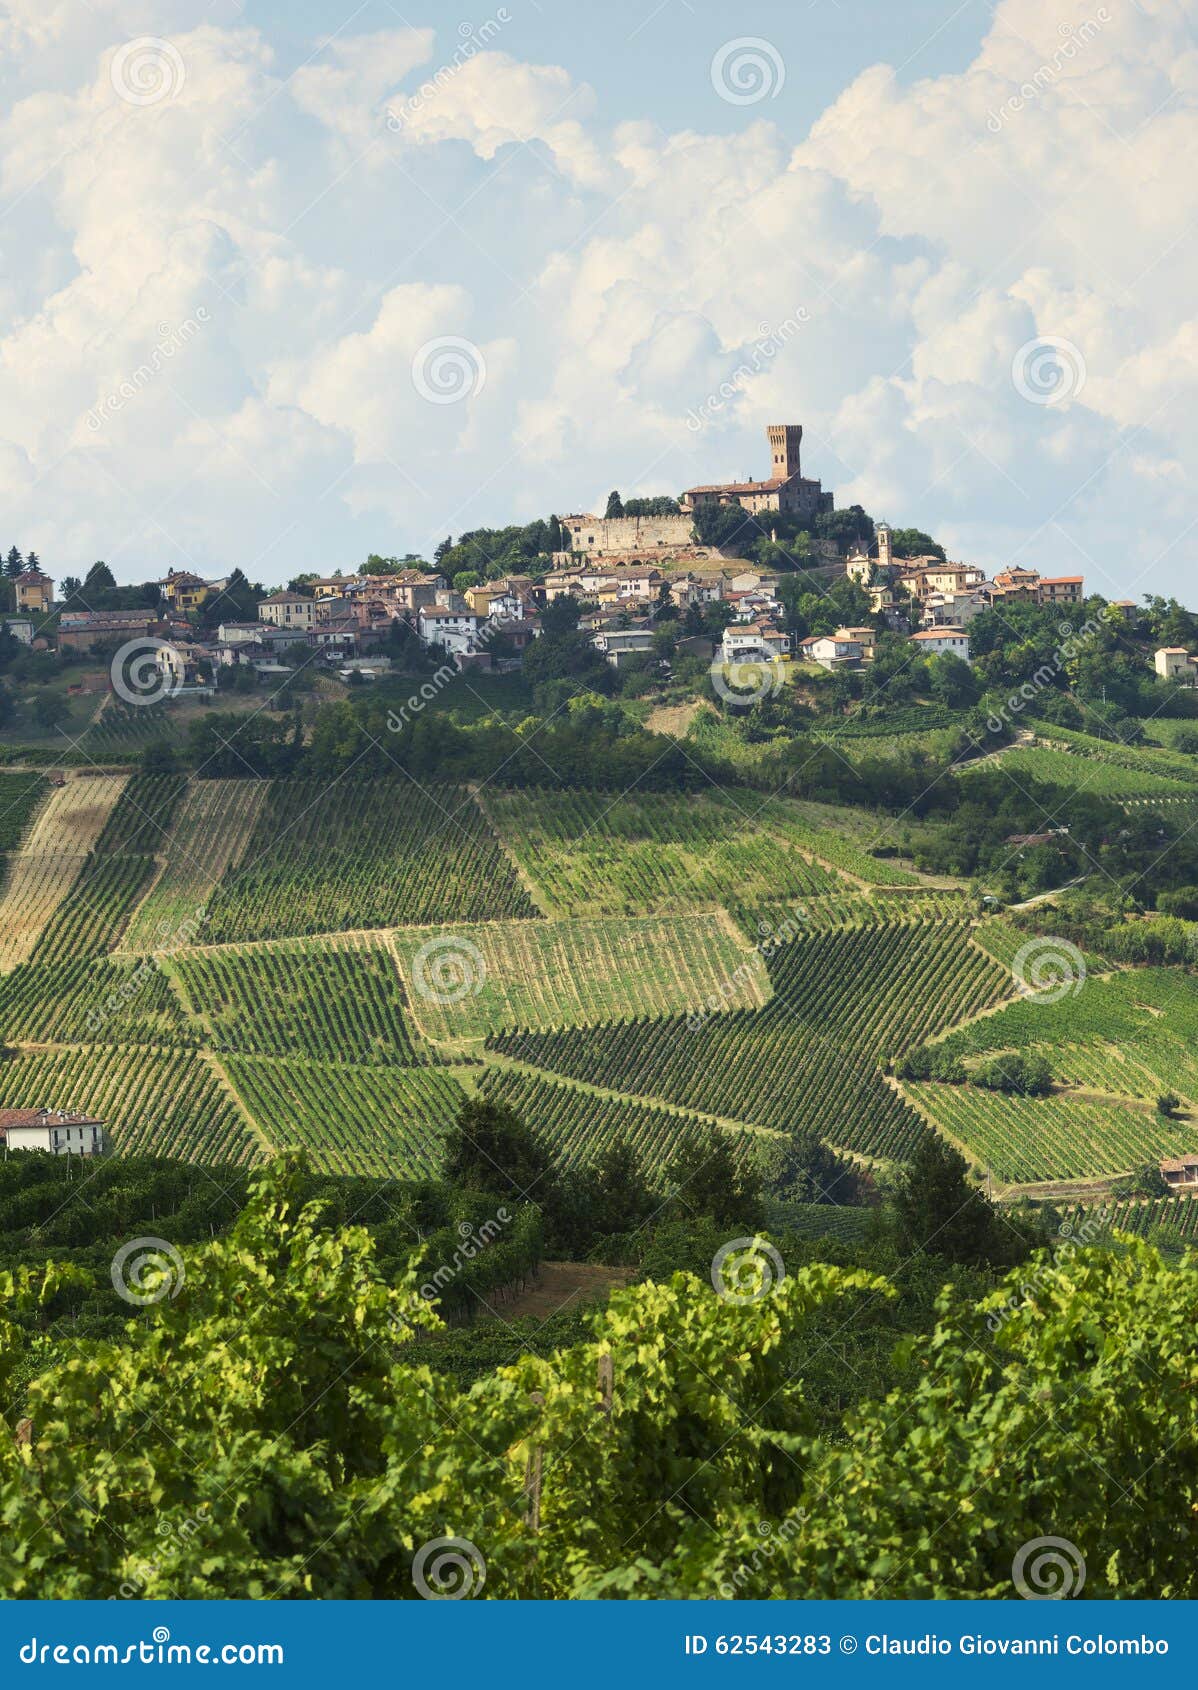 vineyards in oltrepo pavese (italy)